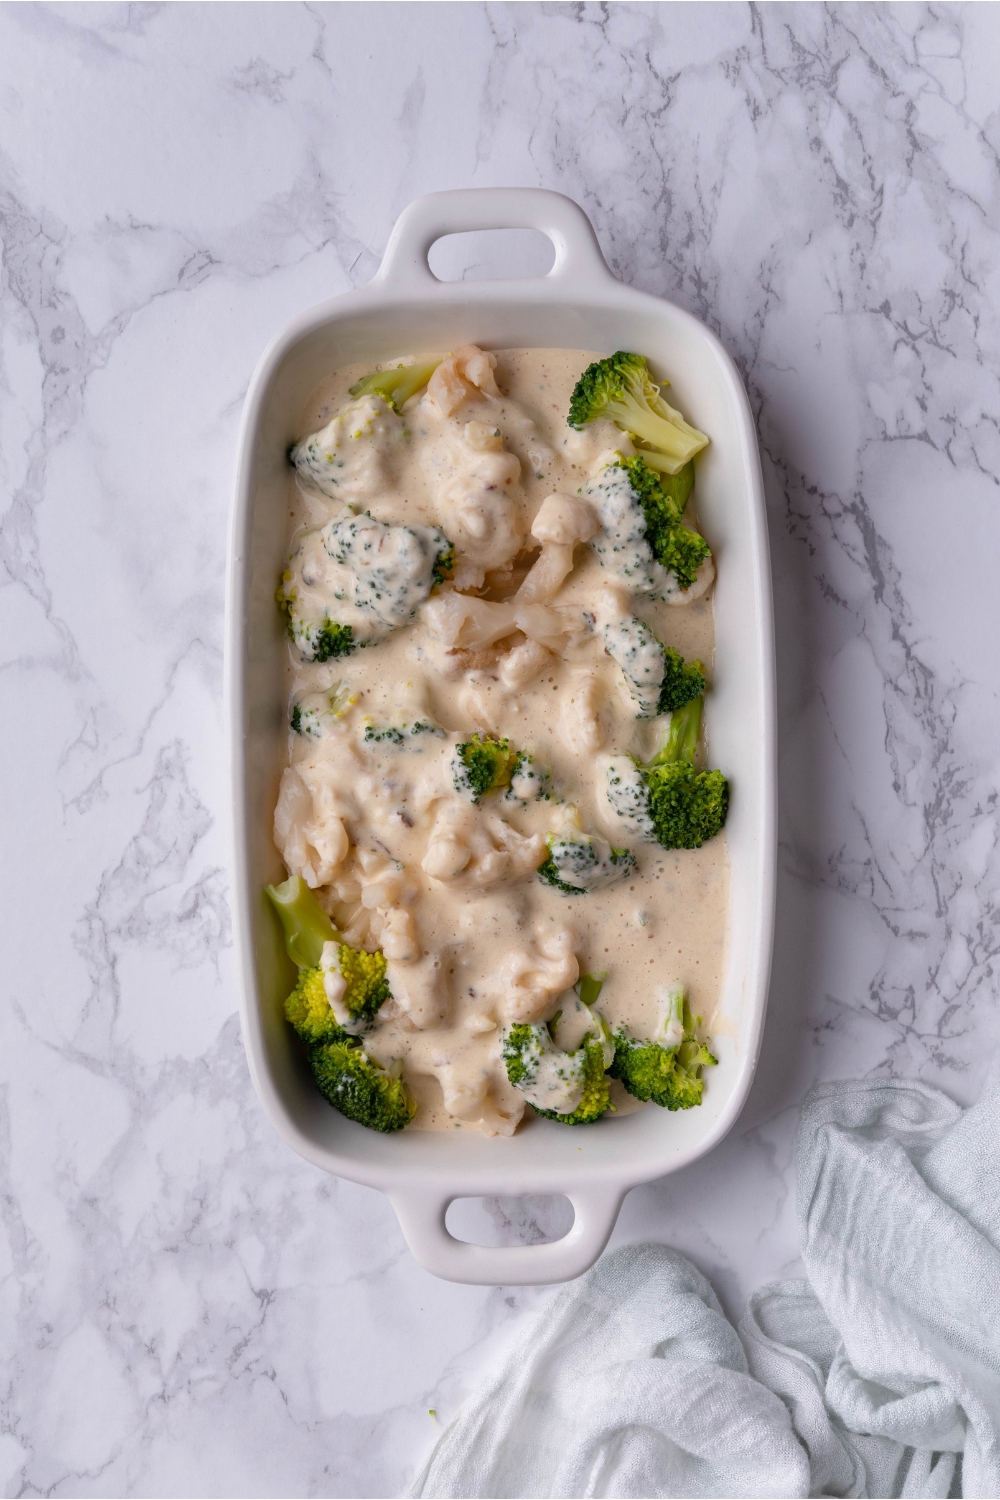 Creamy soup on top of broccoli and cauliflower in a casserole dish.